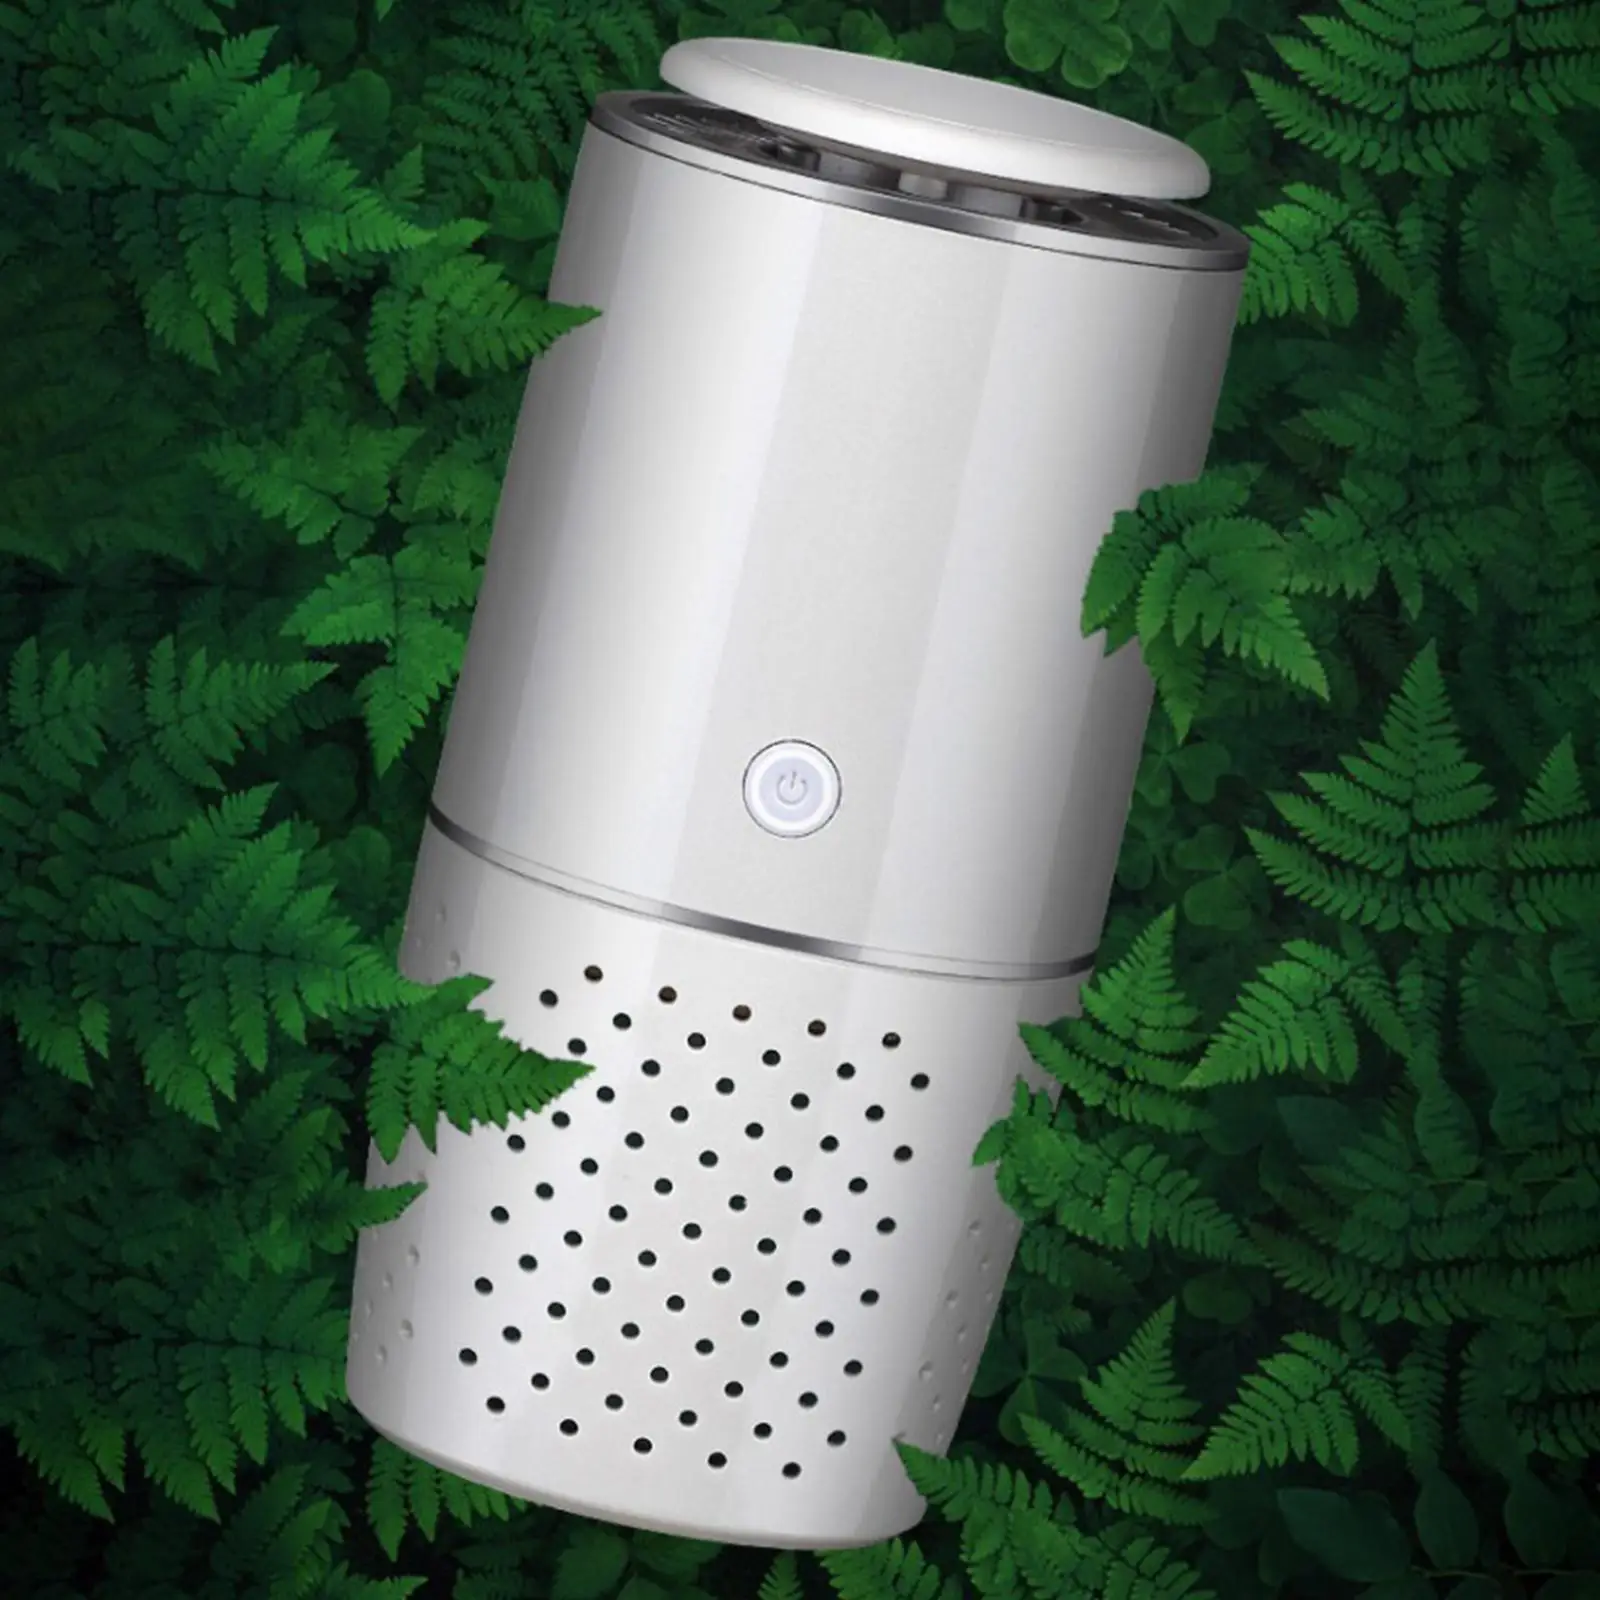  & Mini HEPA  with 3-Stage Filtration  for Car & Office, Eliminates Smoke, Dust, Pollen, Low Noise and USB Powered